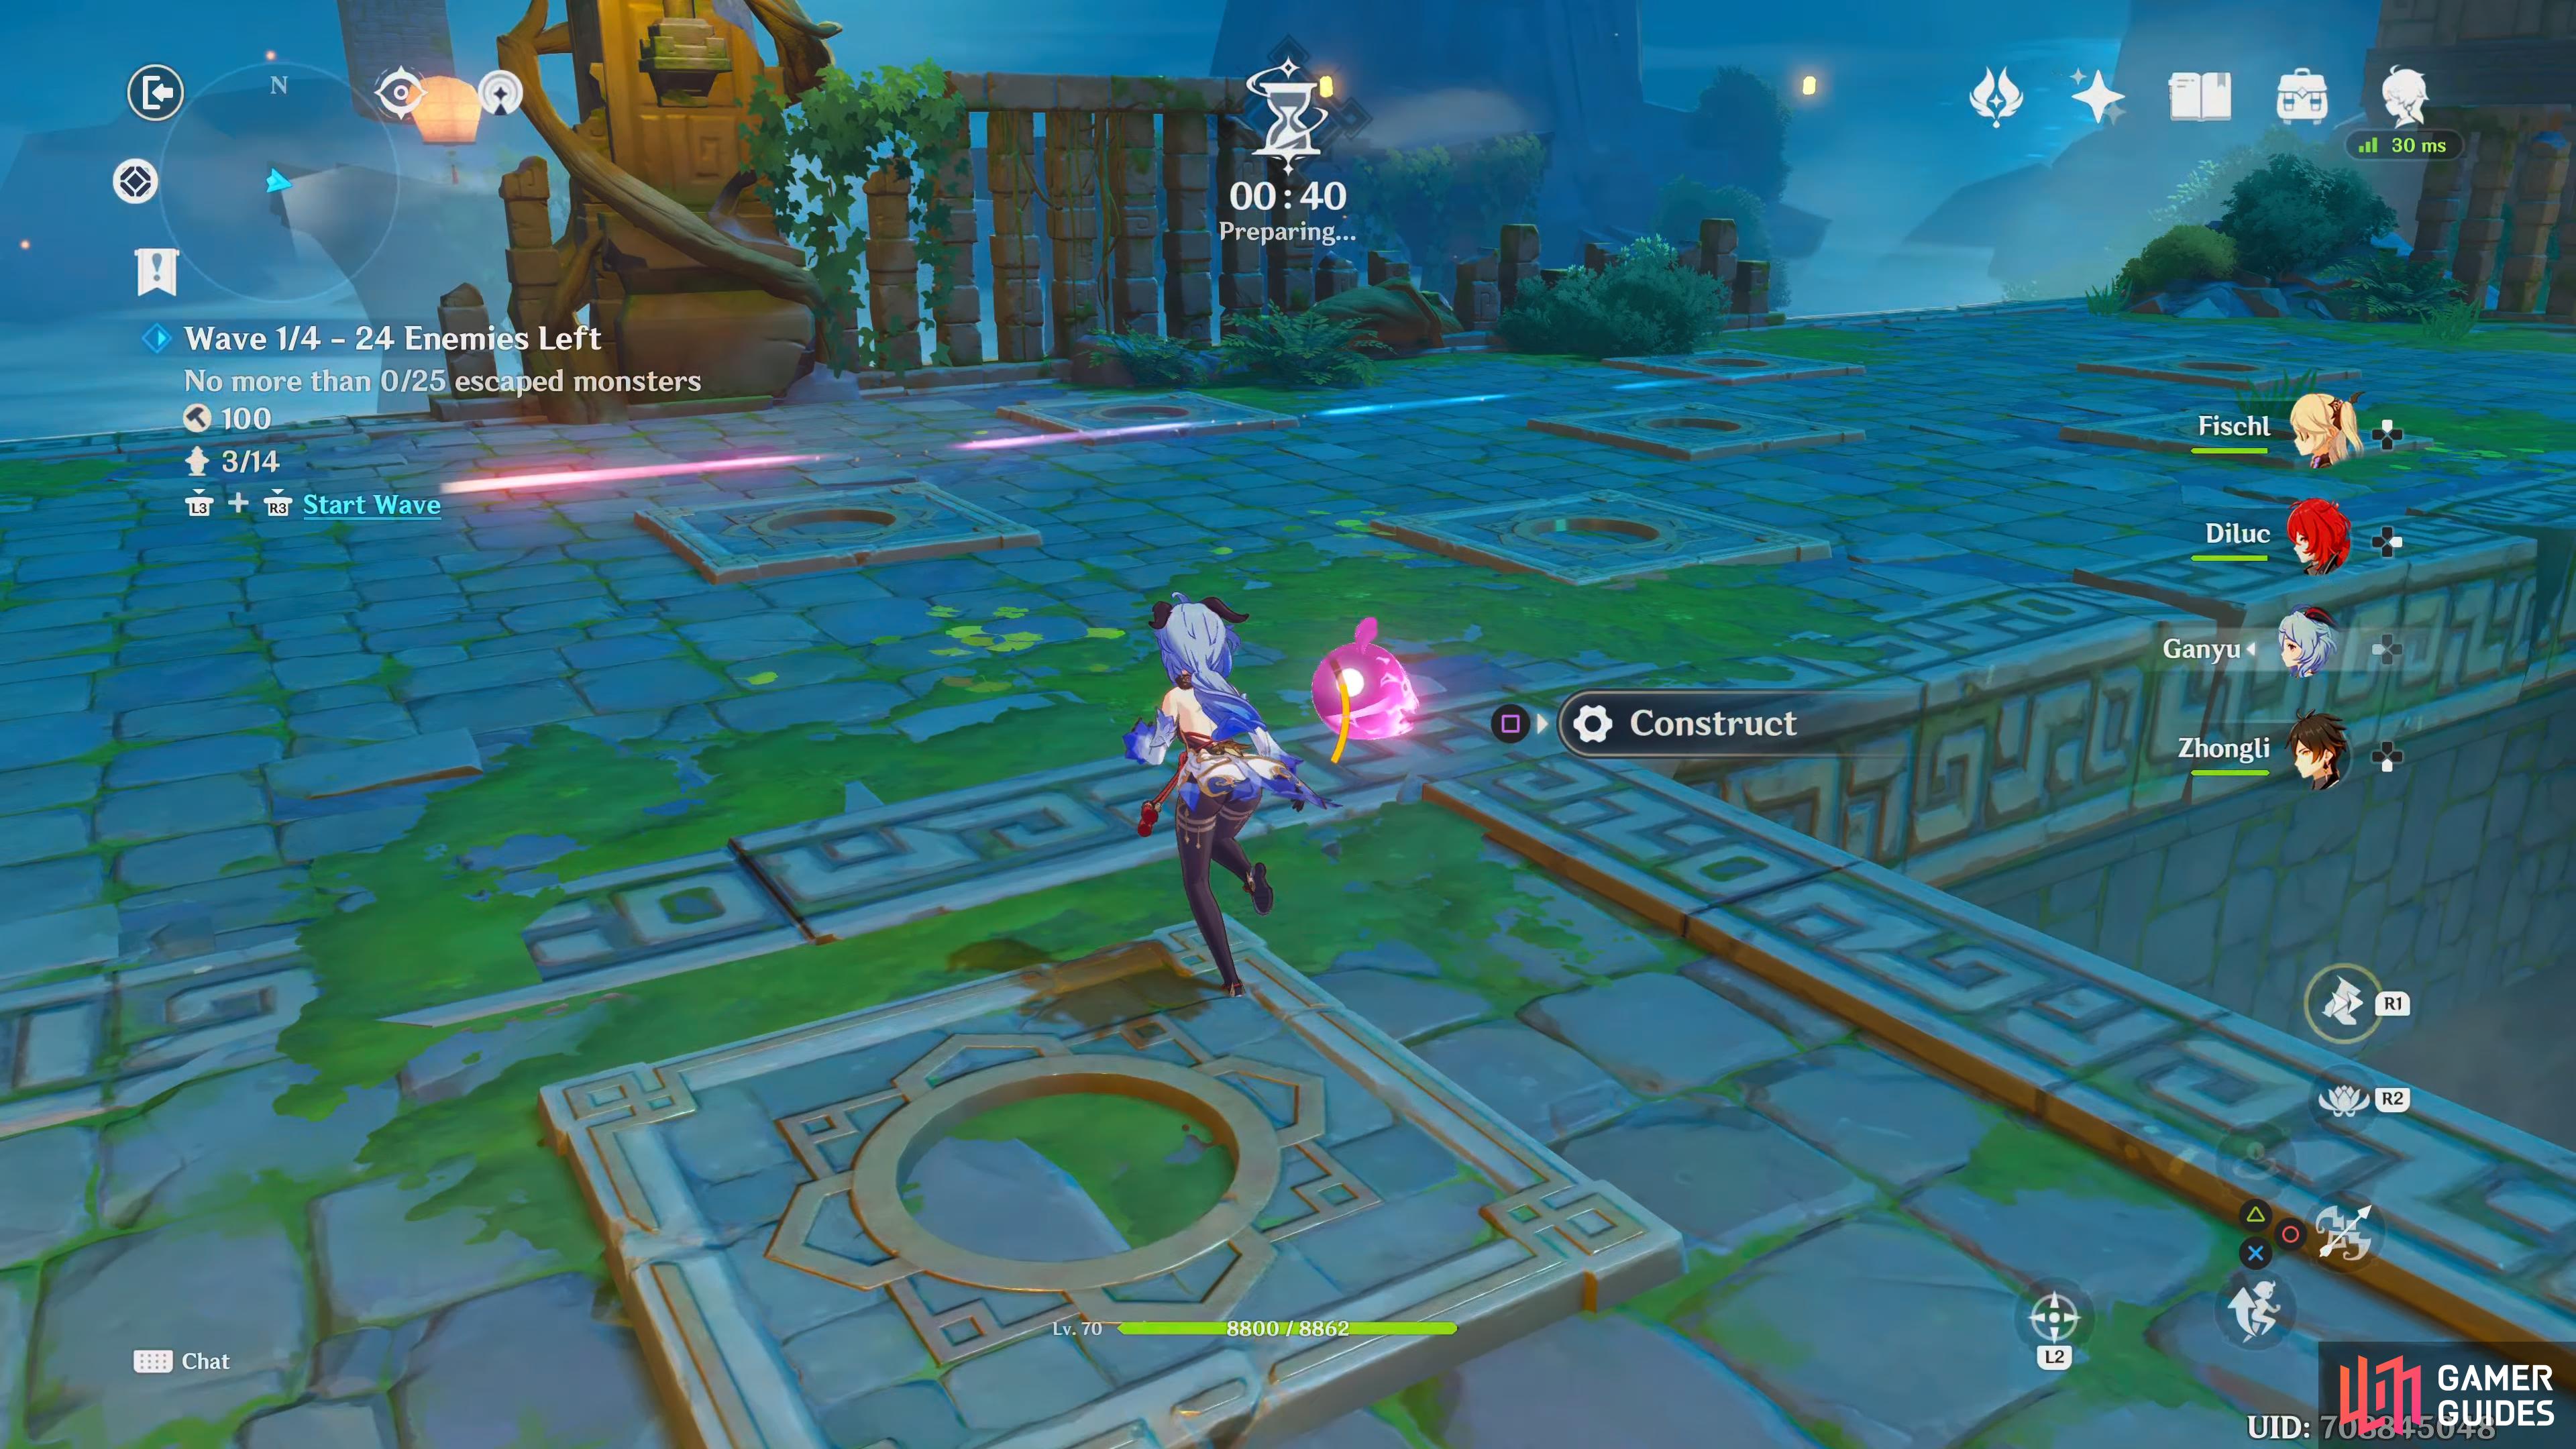 you can see what direction the enemies will take with a red/blue line showing you their path.